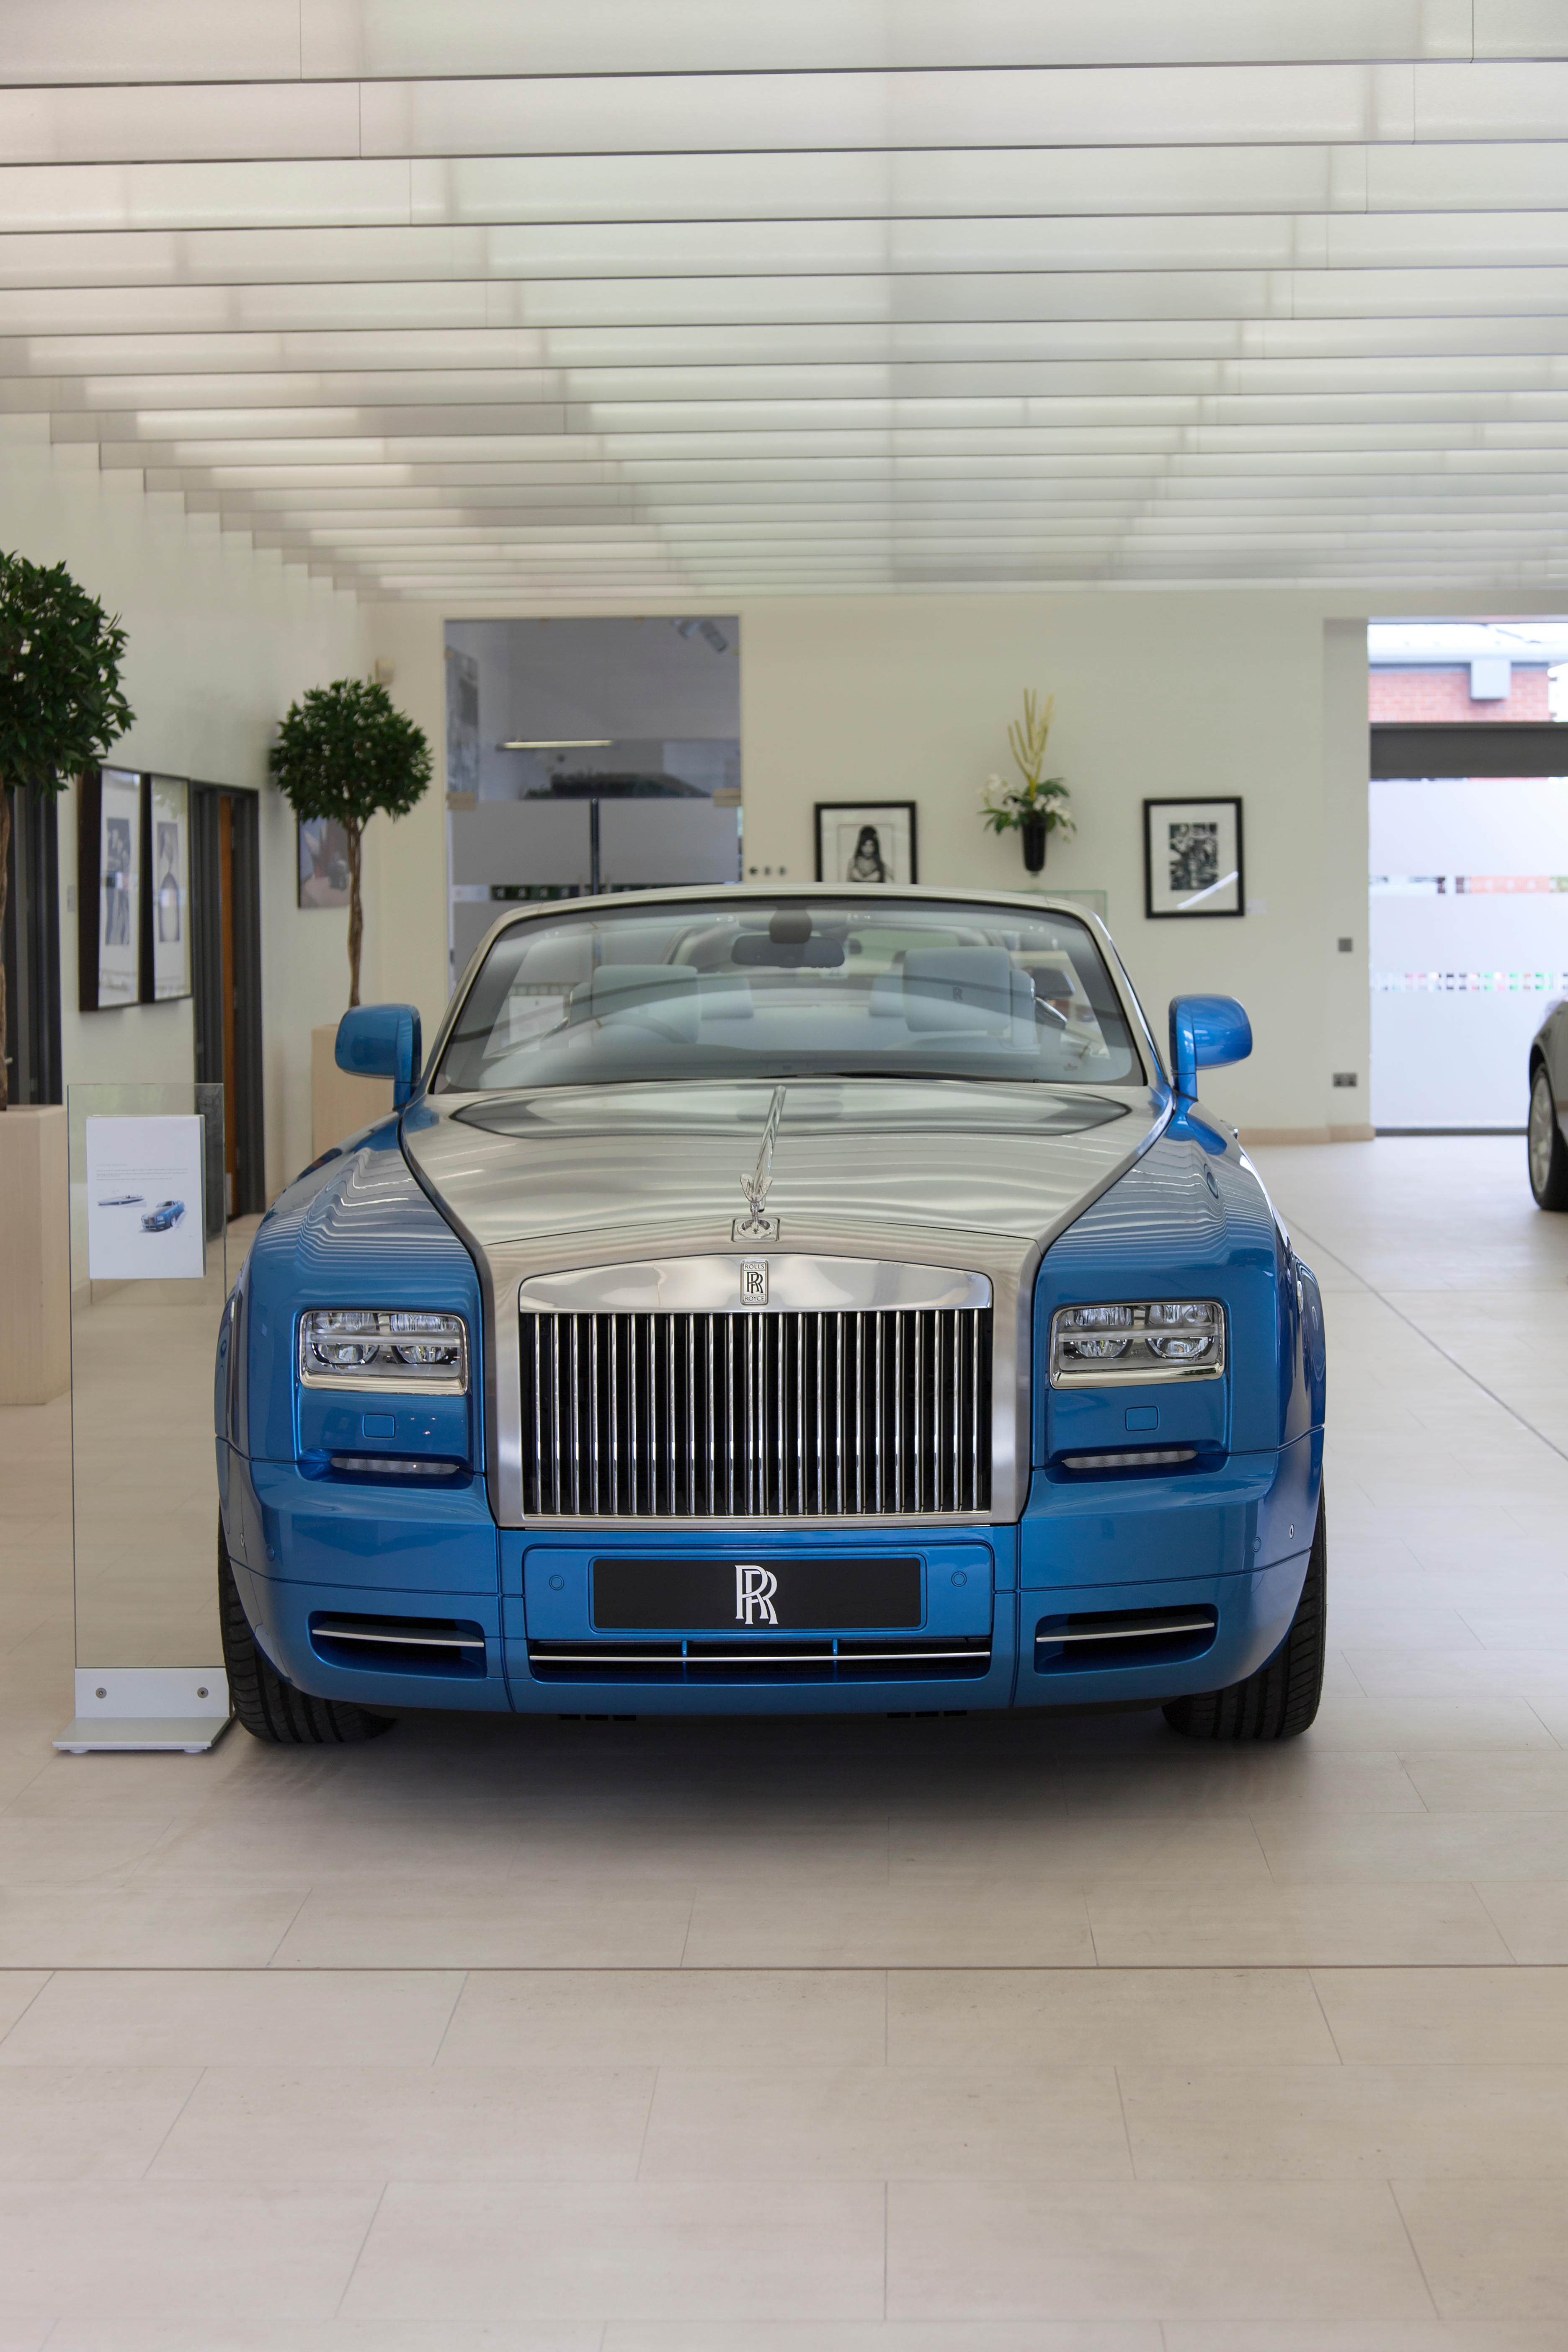 Images Rolls-Royce Motor Cars Manchester